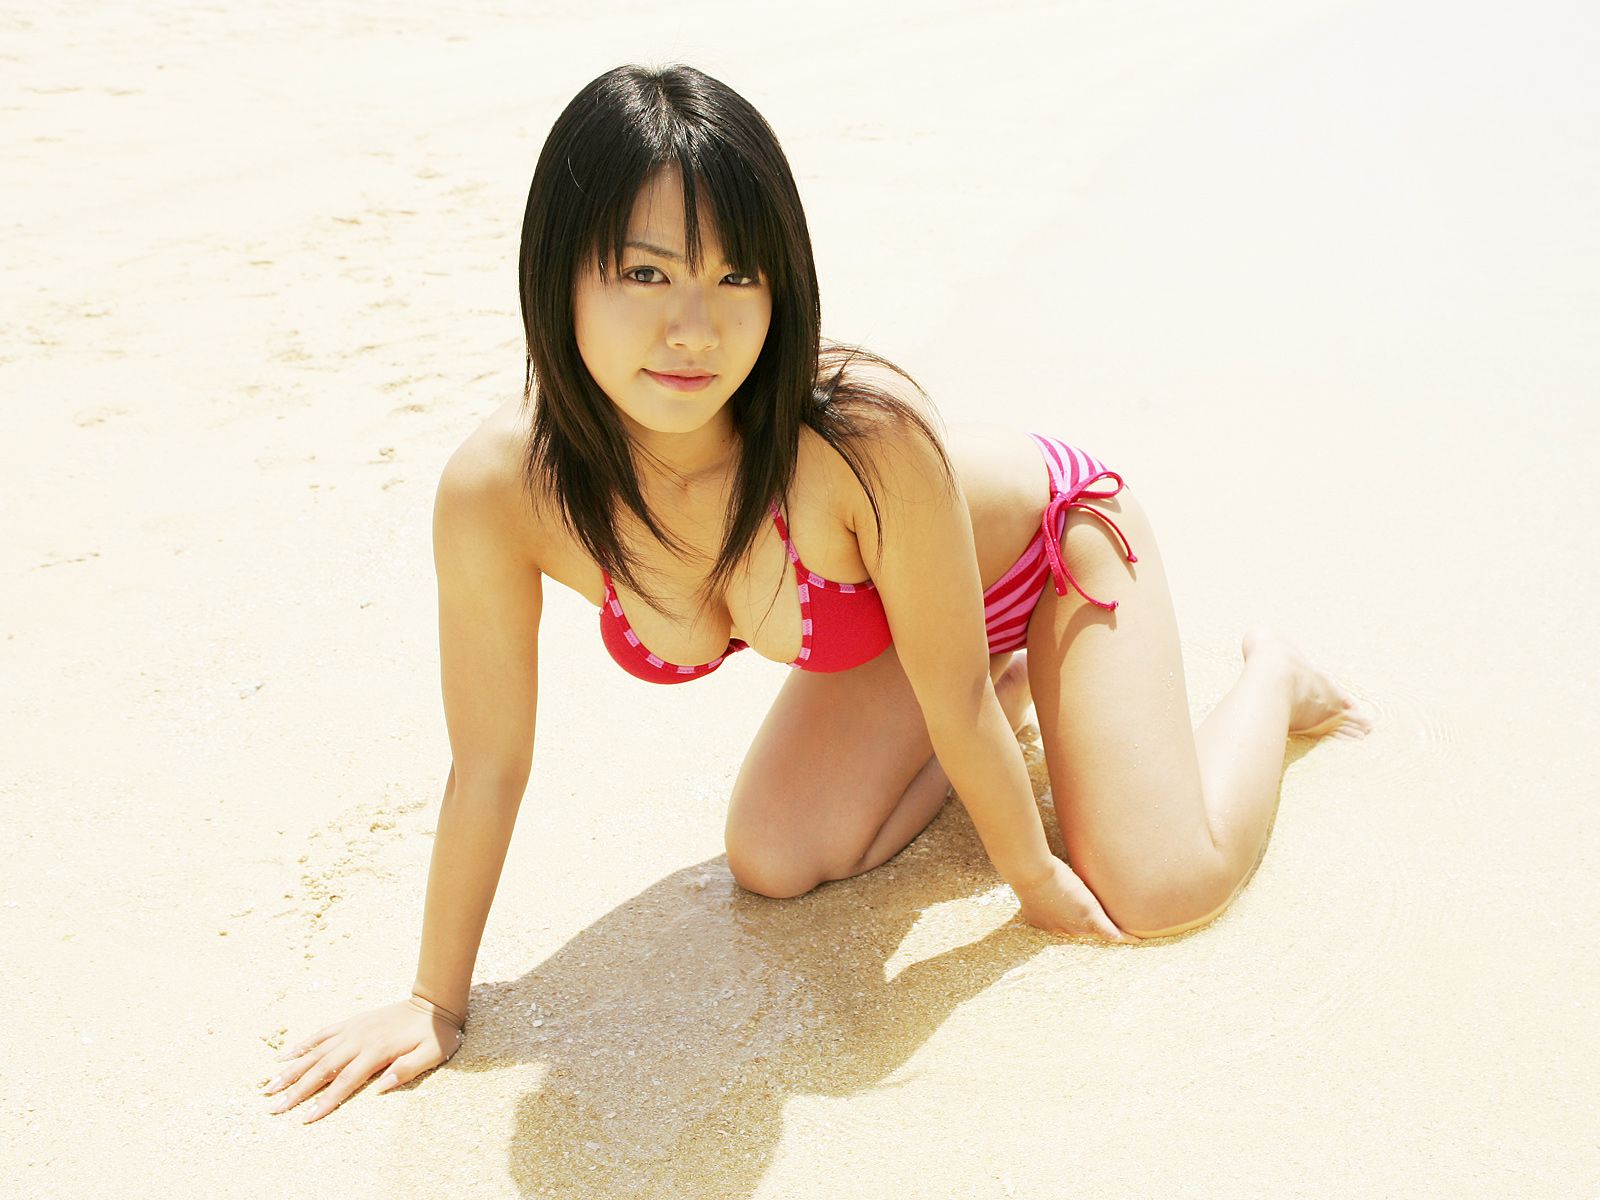 [For-side套图] 2006.06.23 Sayaka Isoyama 磯山さやか Go Looking for Me2